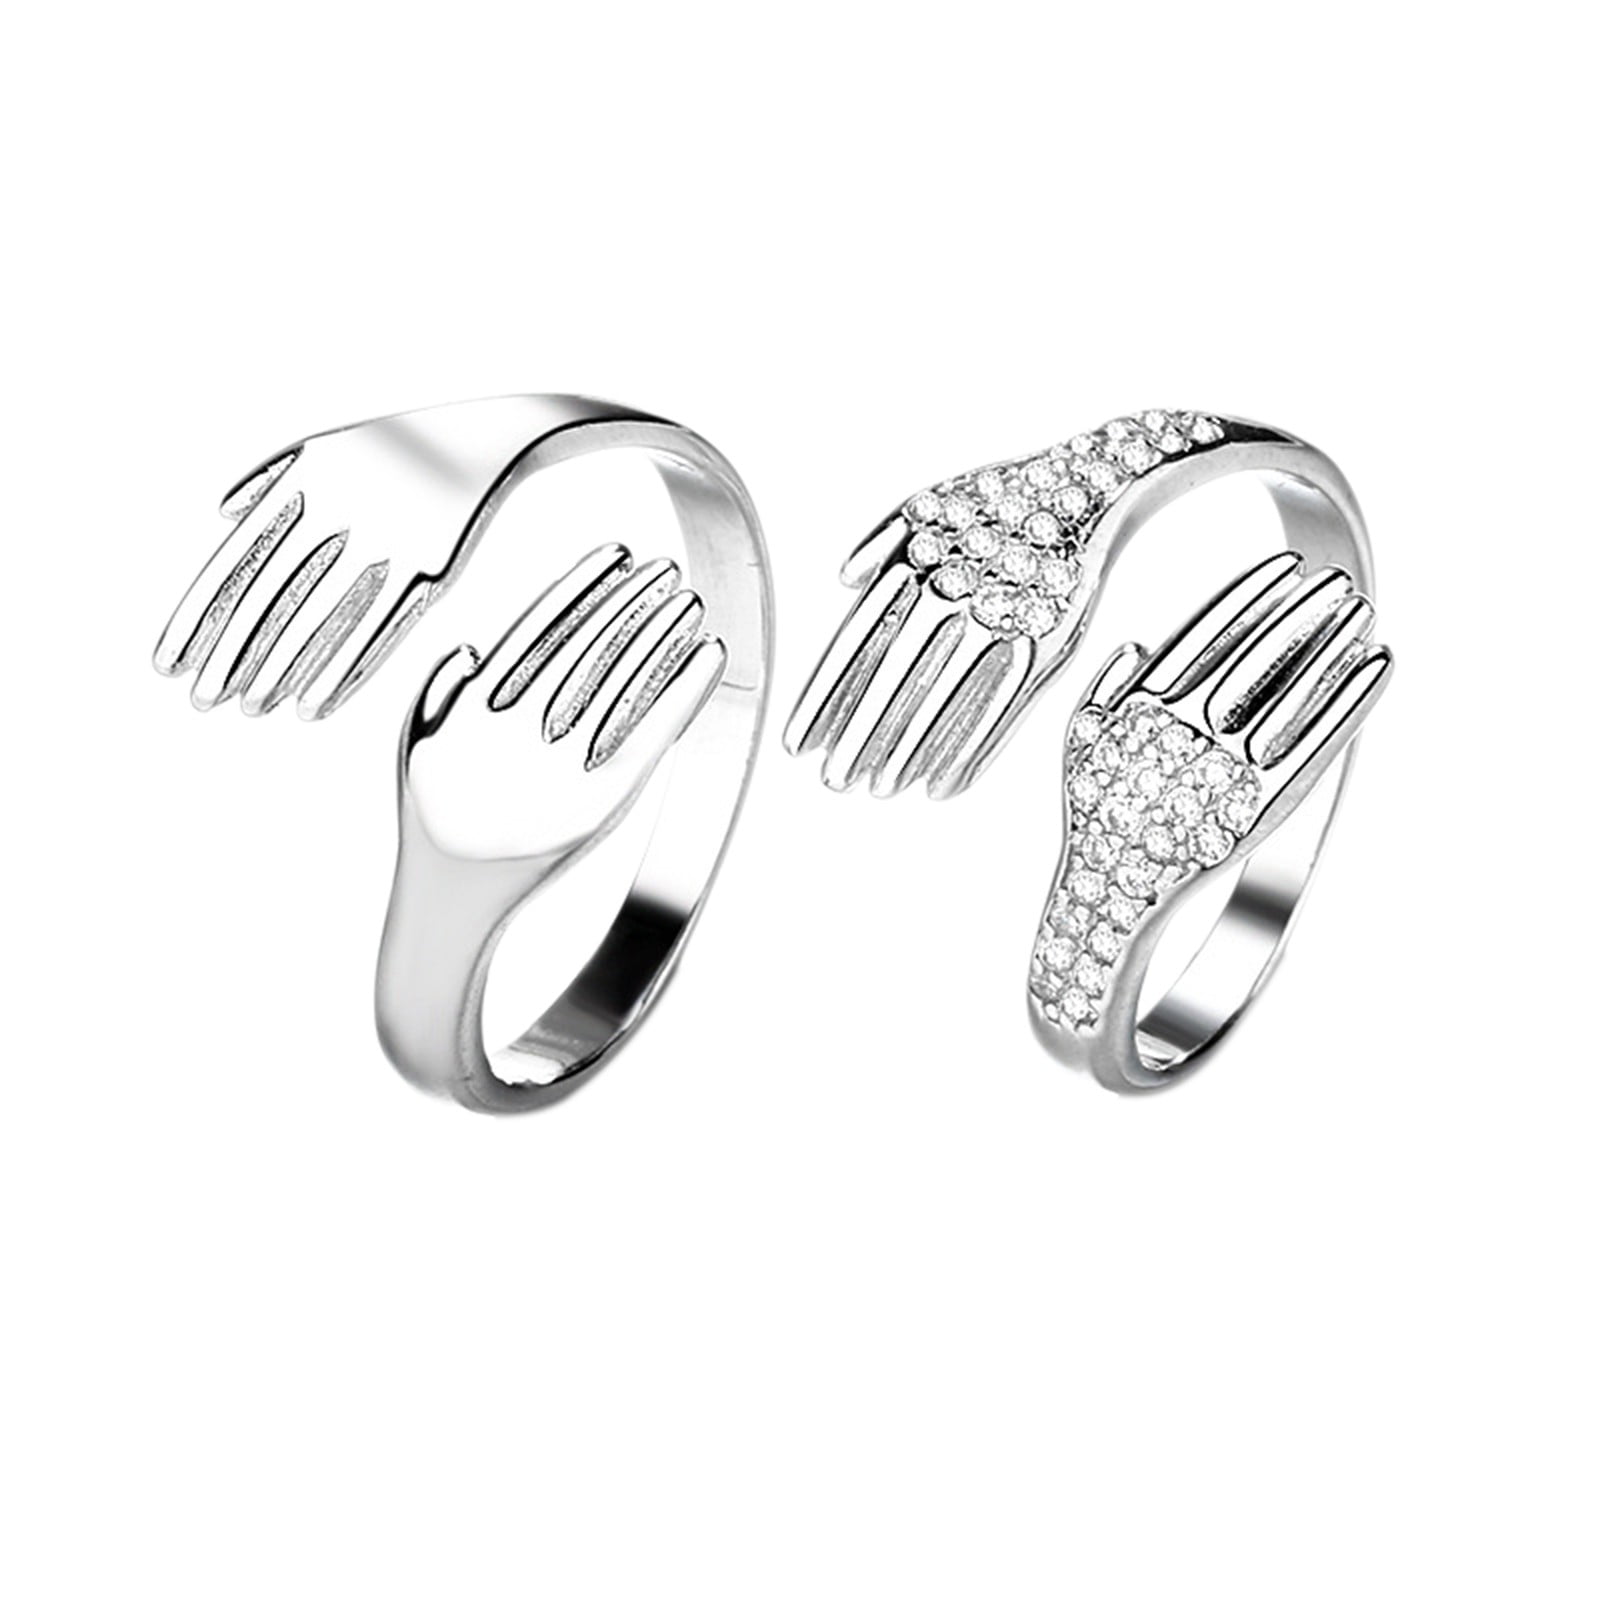 Silvertone B Jewelry Collection Interlocking Pave Knuckle Ring 